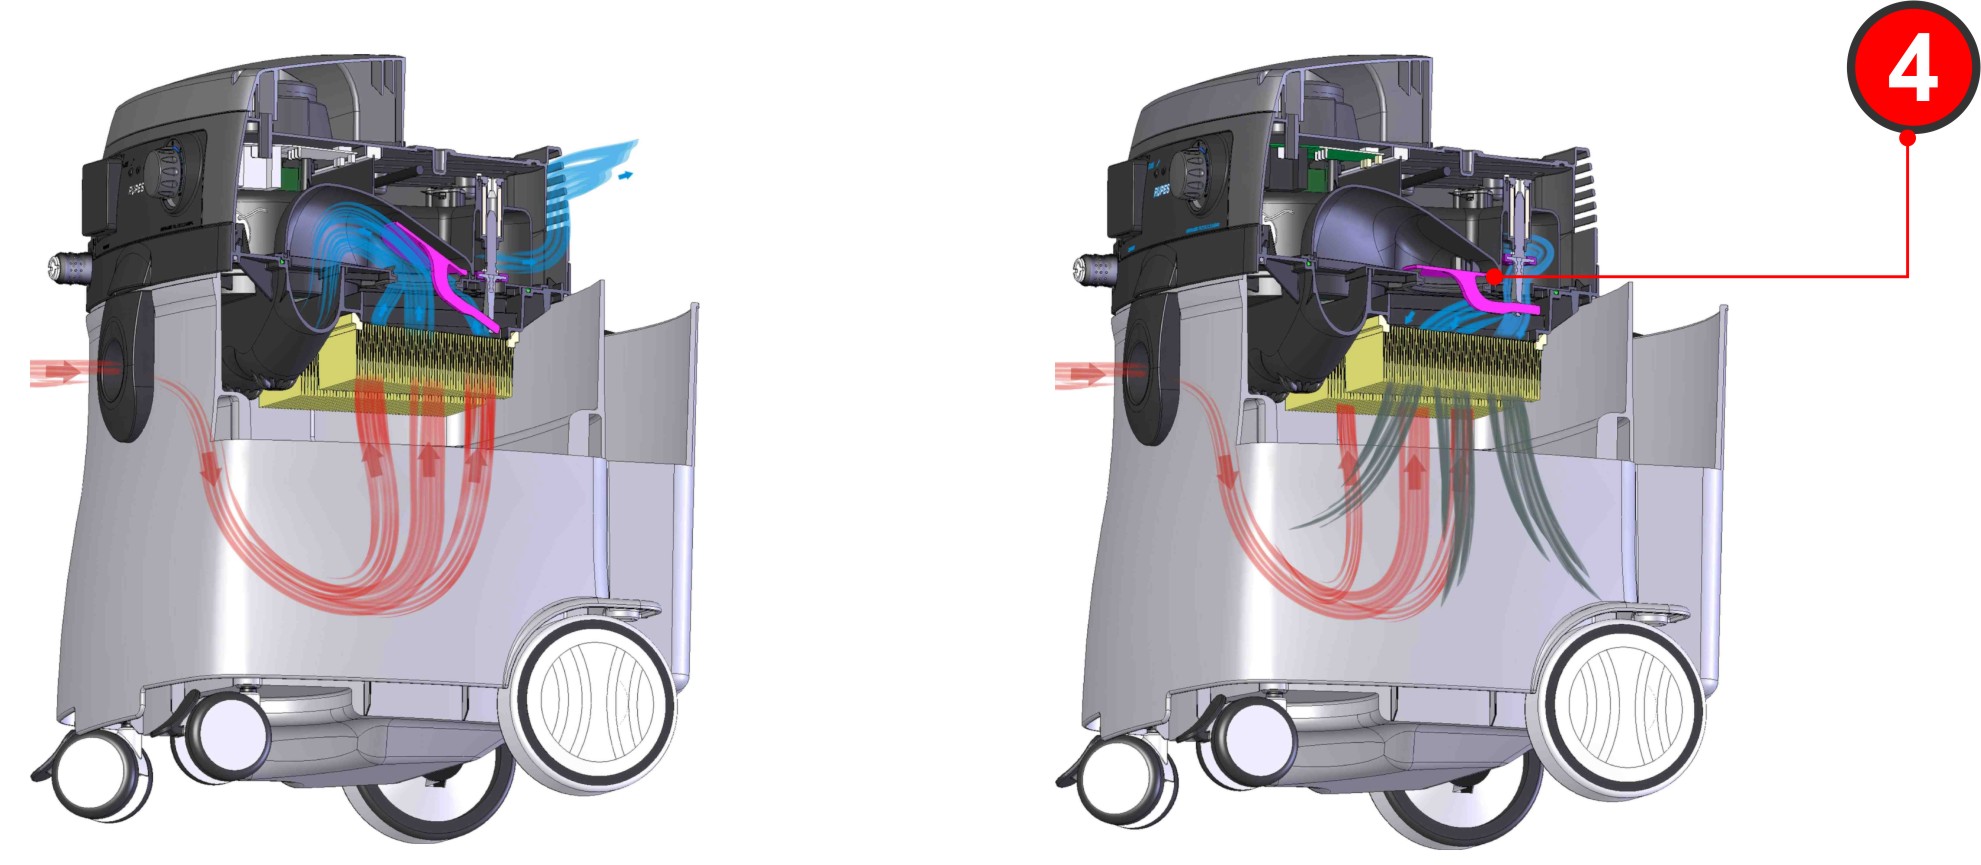 Rupes S 145 EPL Dust extractor with automatic electro-pneumatic switch